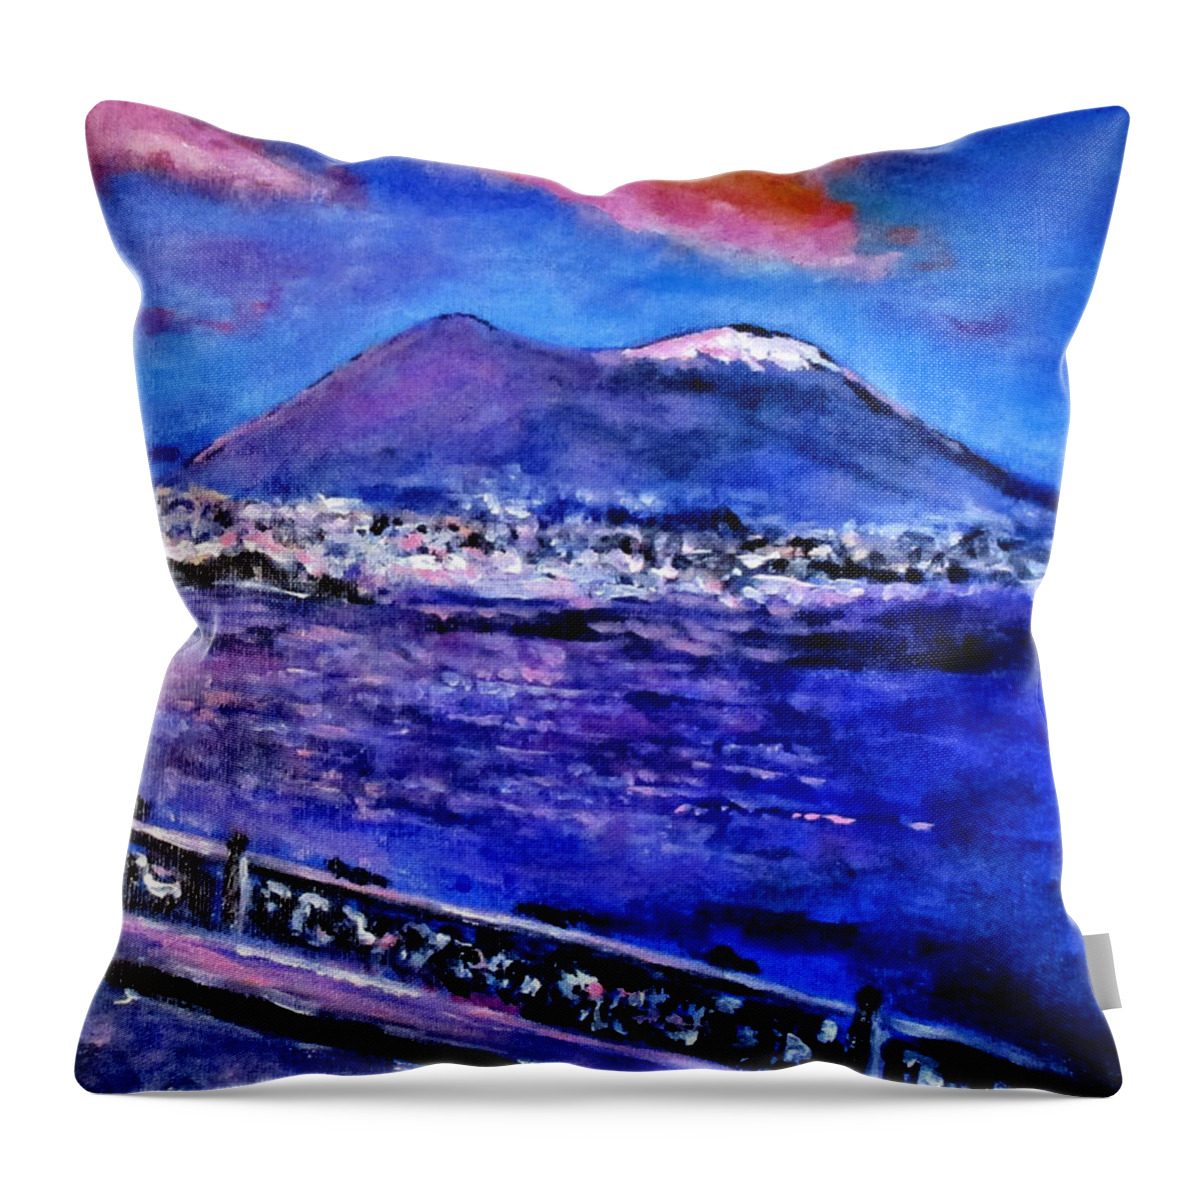 Naples Italy Throw Pillow featuring the painting Napoli Magenta Sunrise by Clyde J Kell